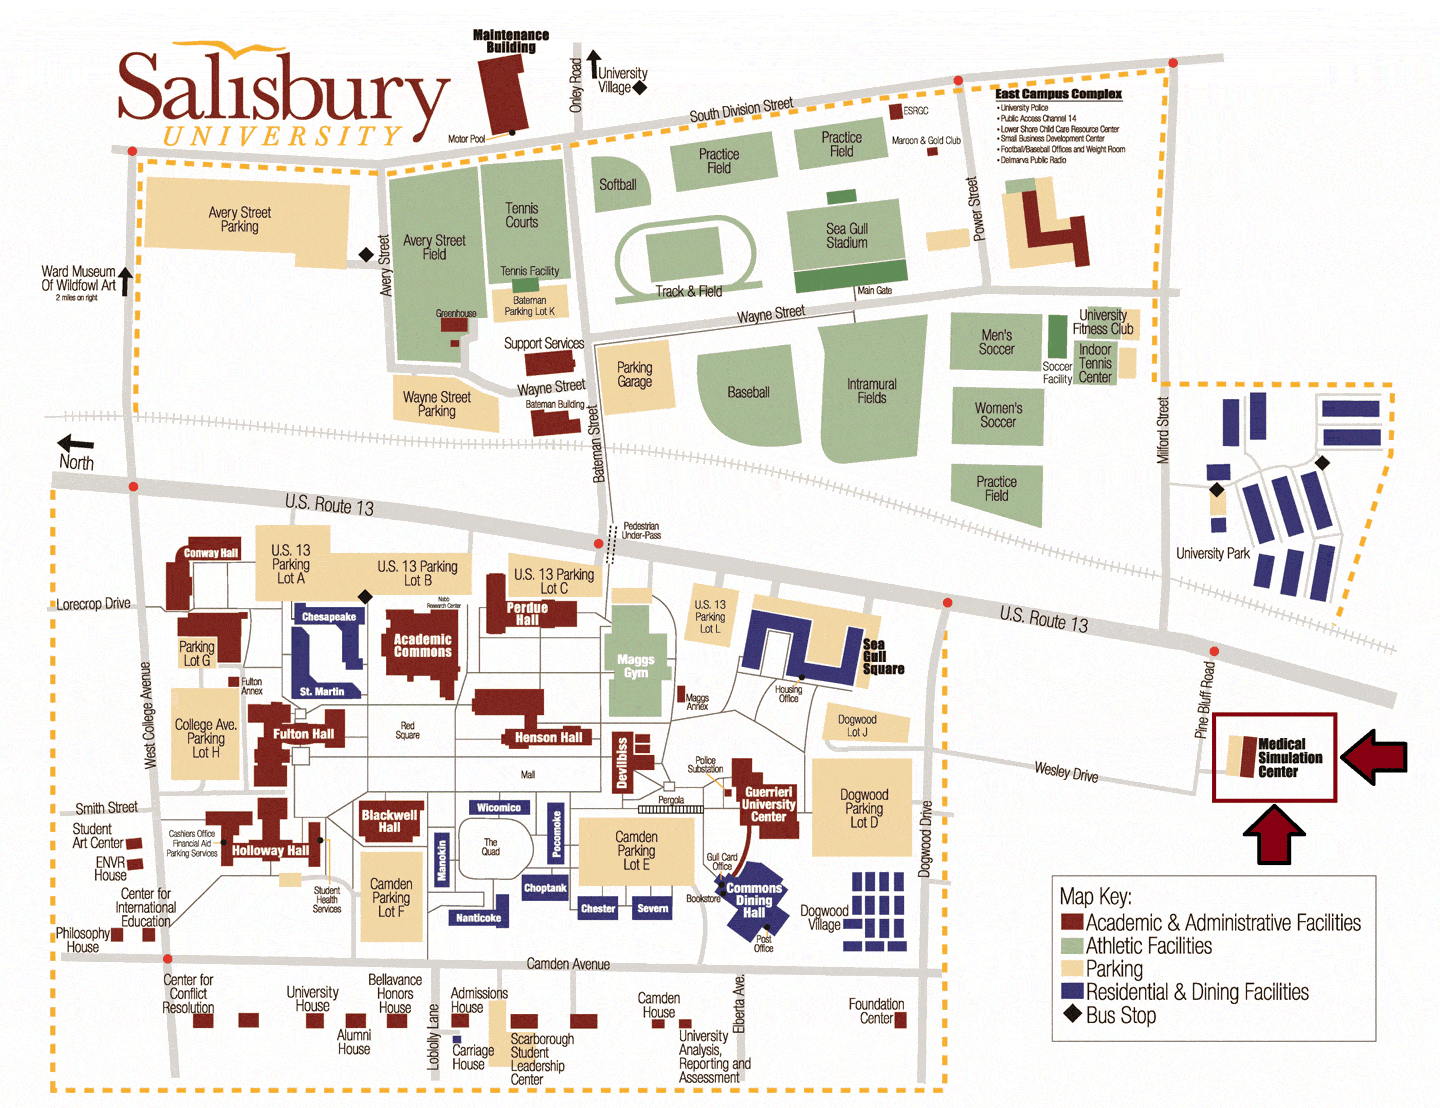 Campus Map showing location of Simulation Center